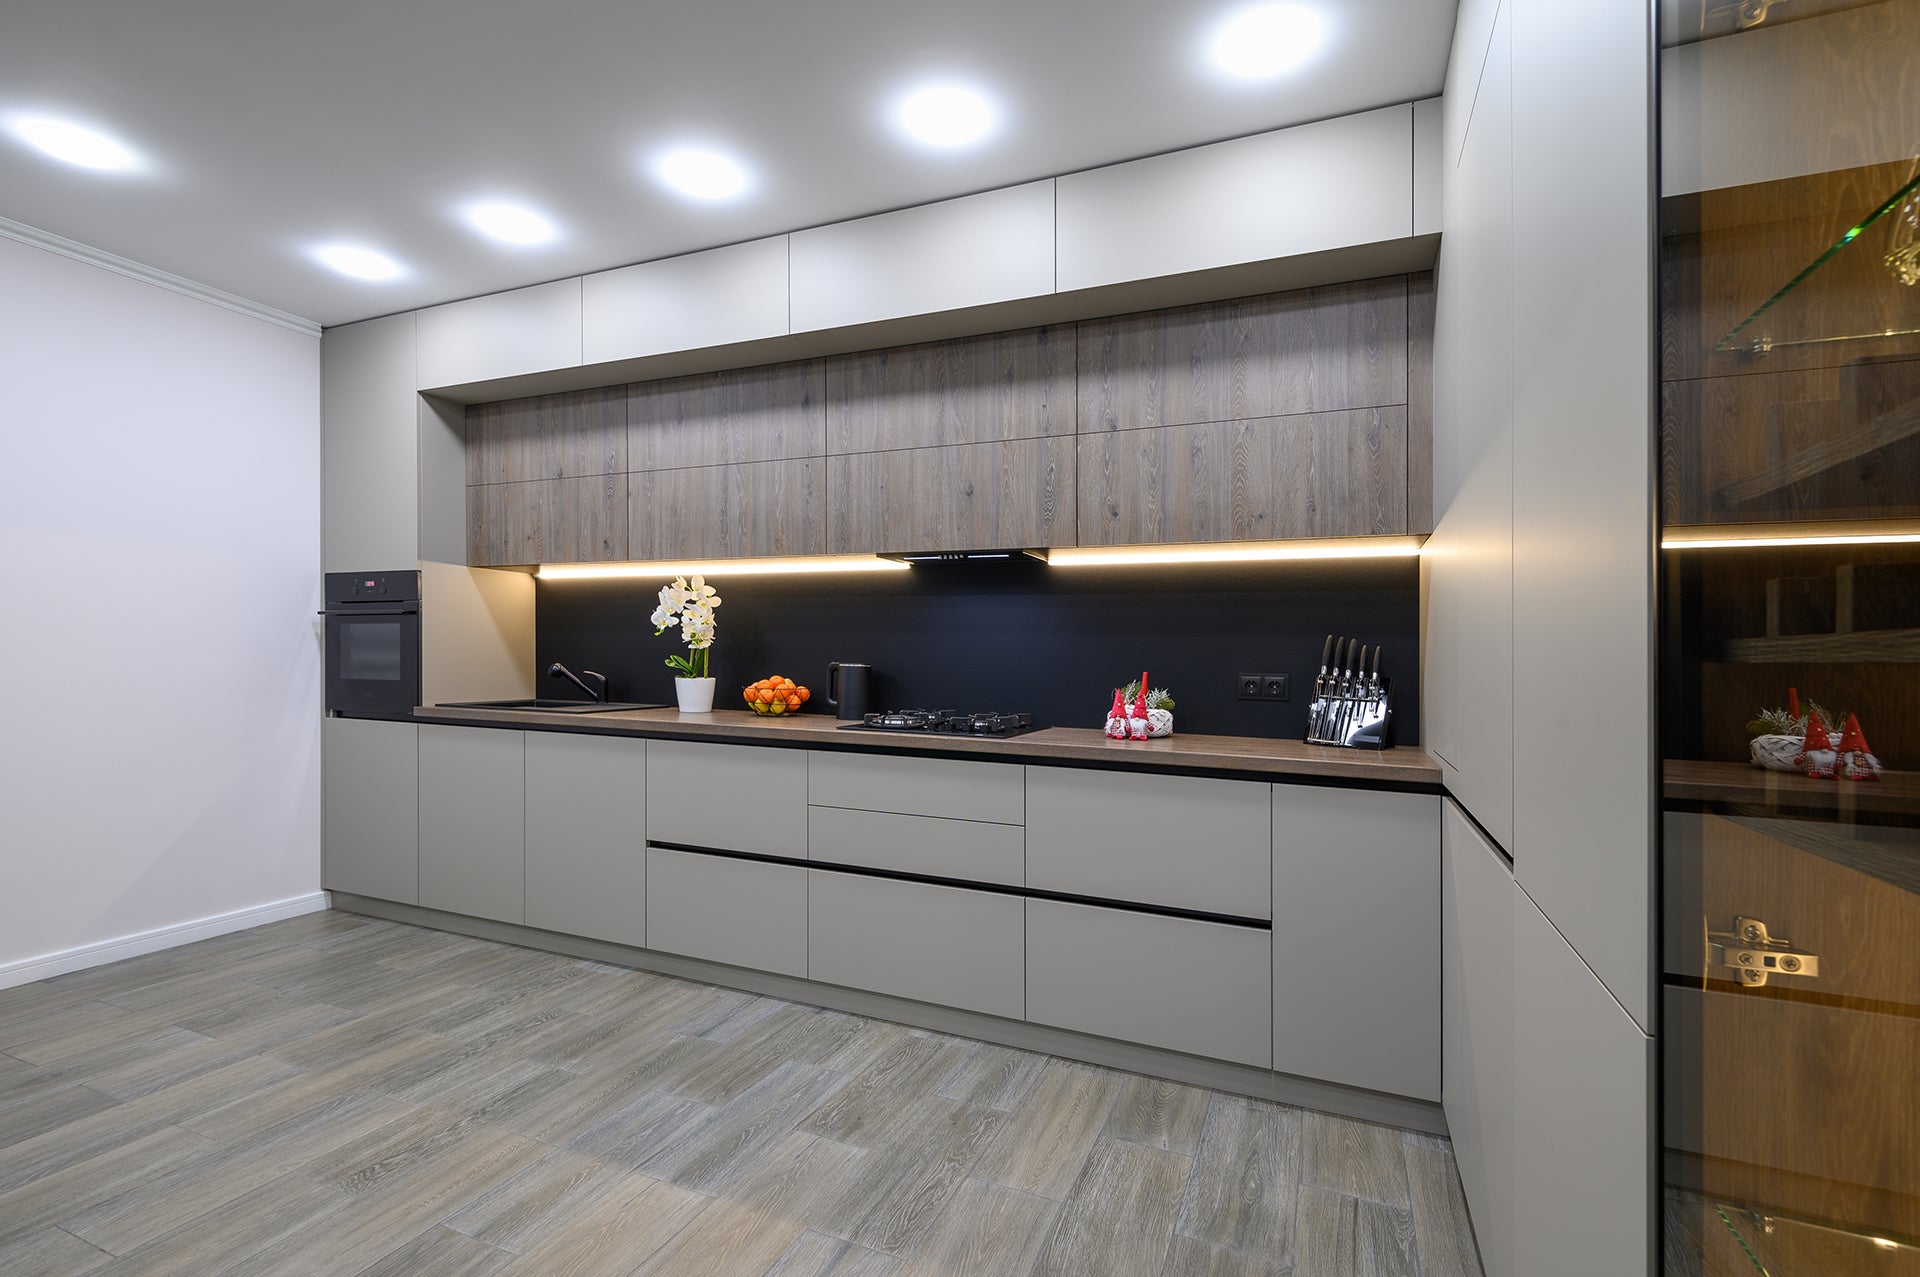 LED Lighting in Cabinets